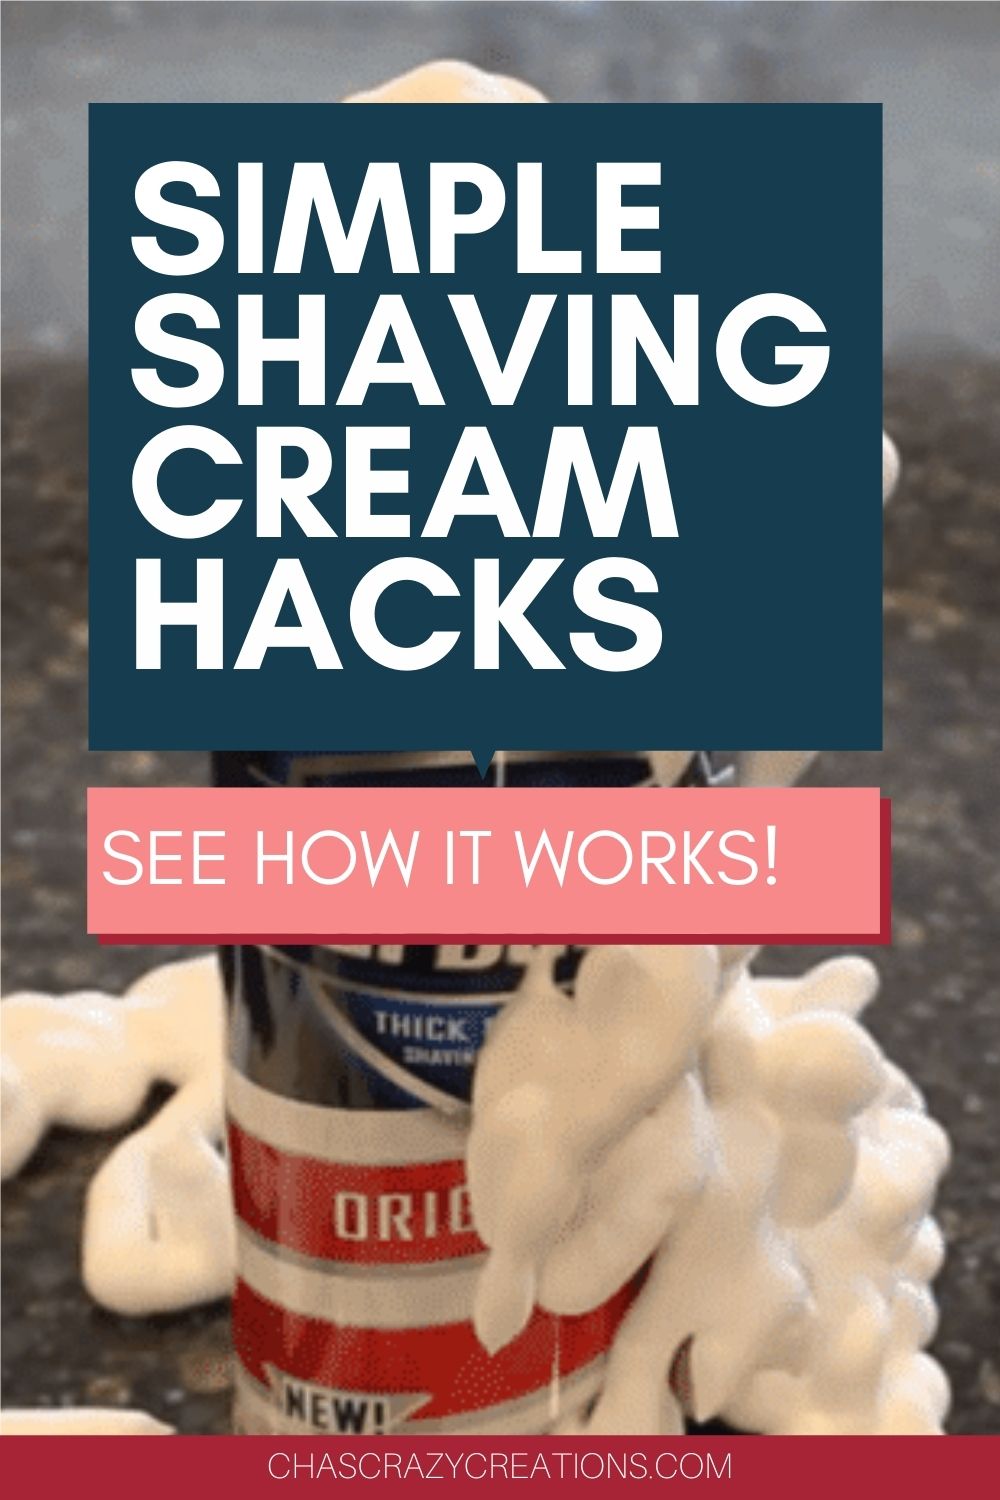 Simple Budget Friendly Shaving Cream Hacks To Help Your Home